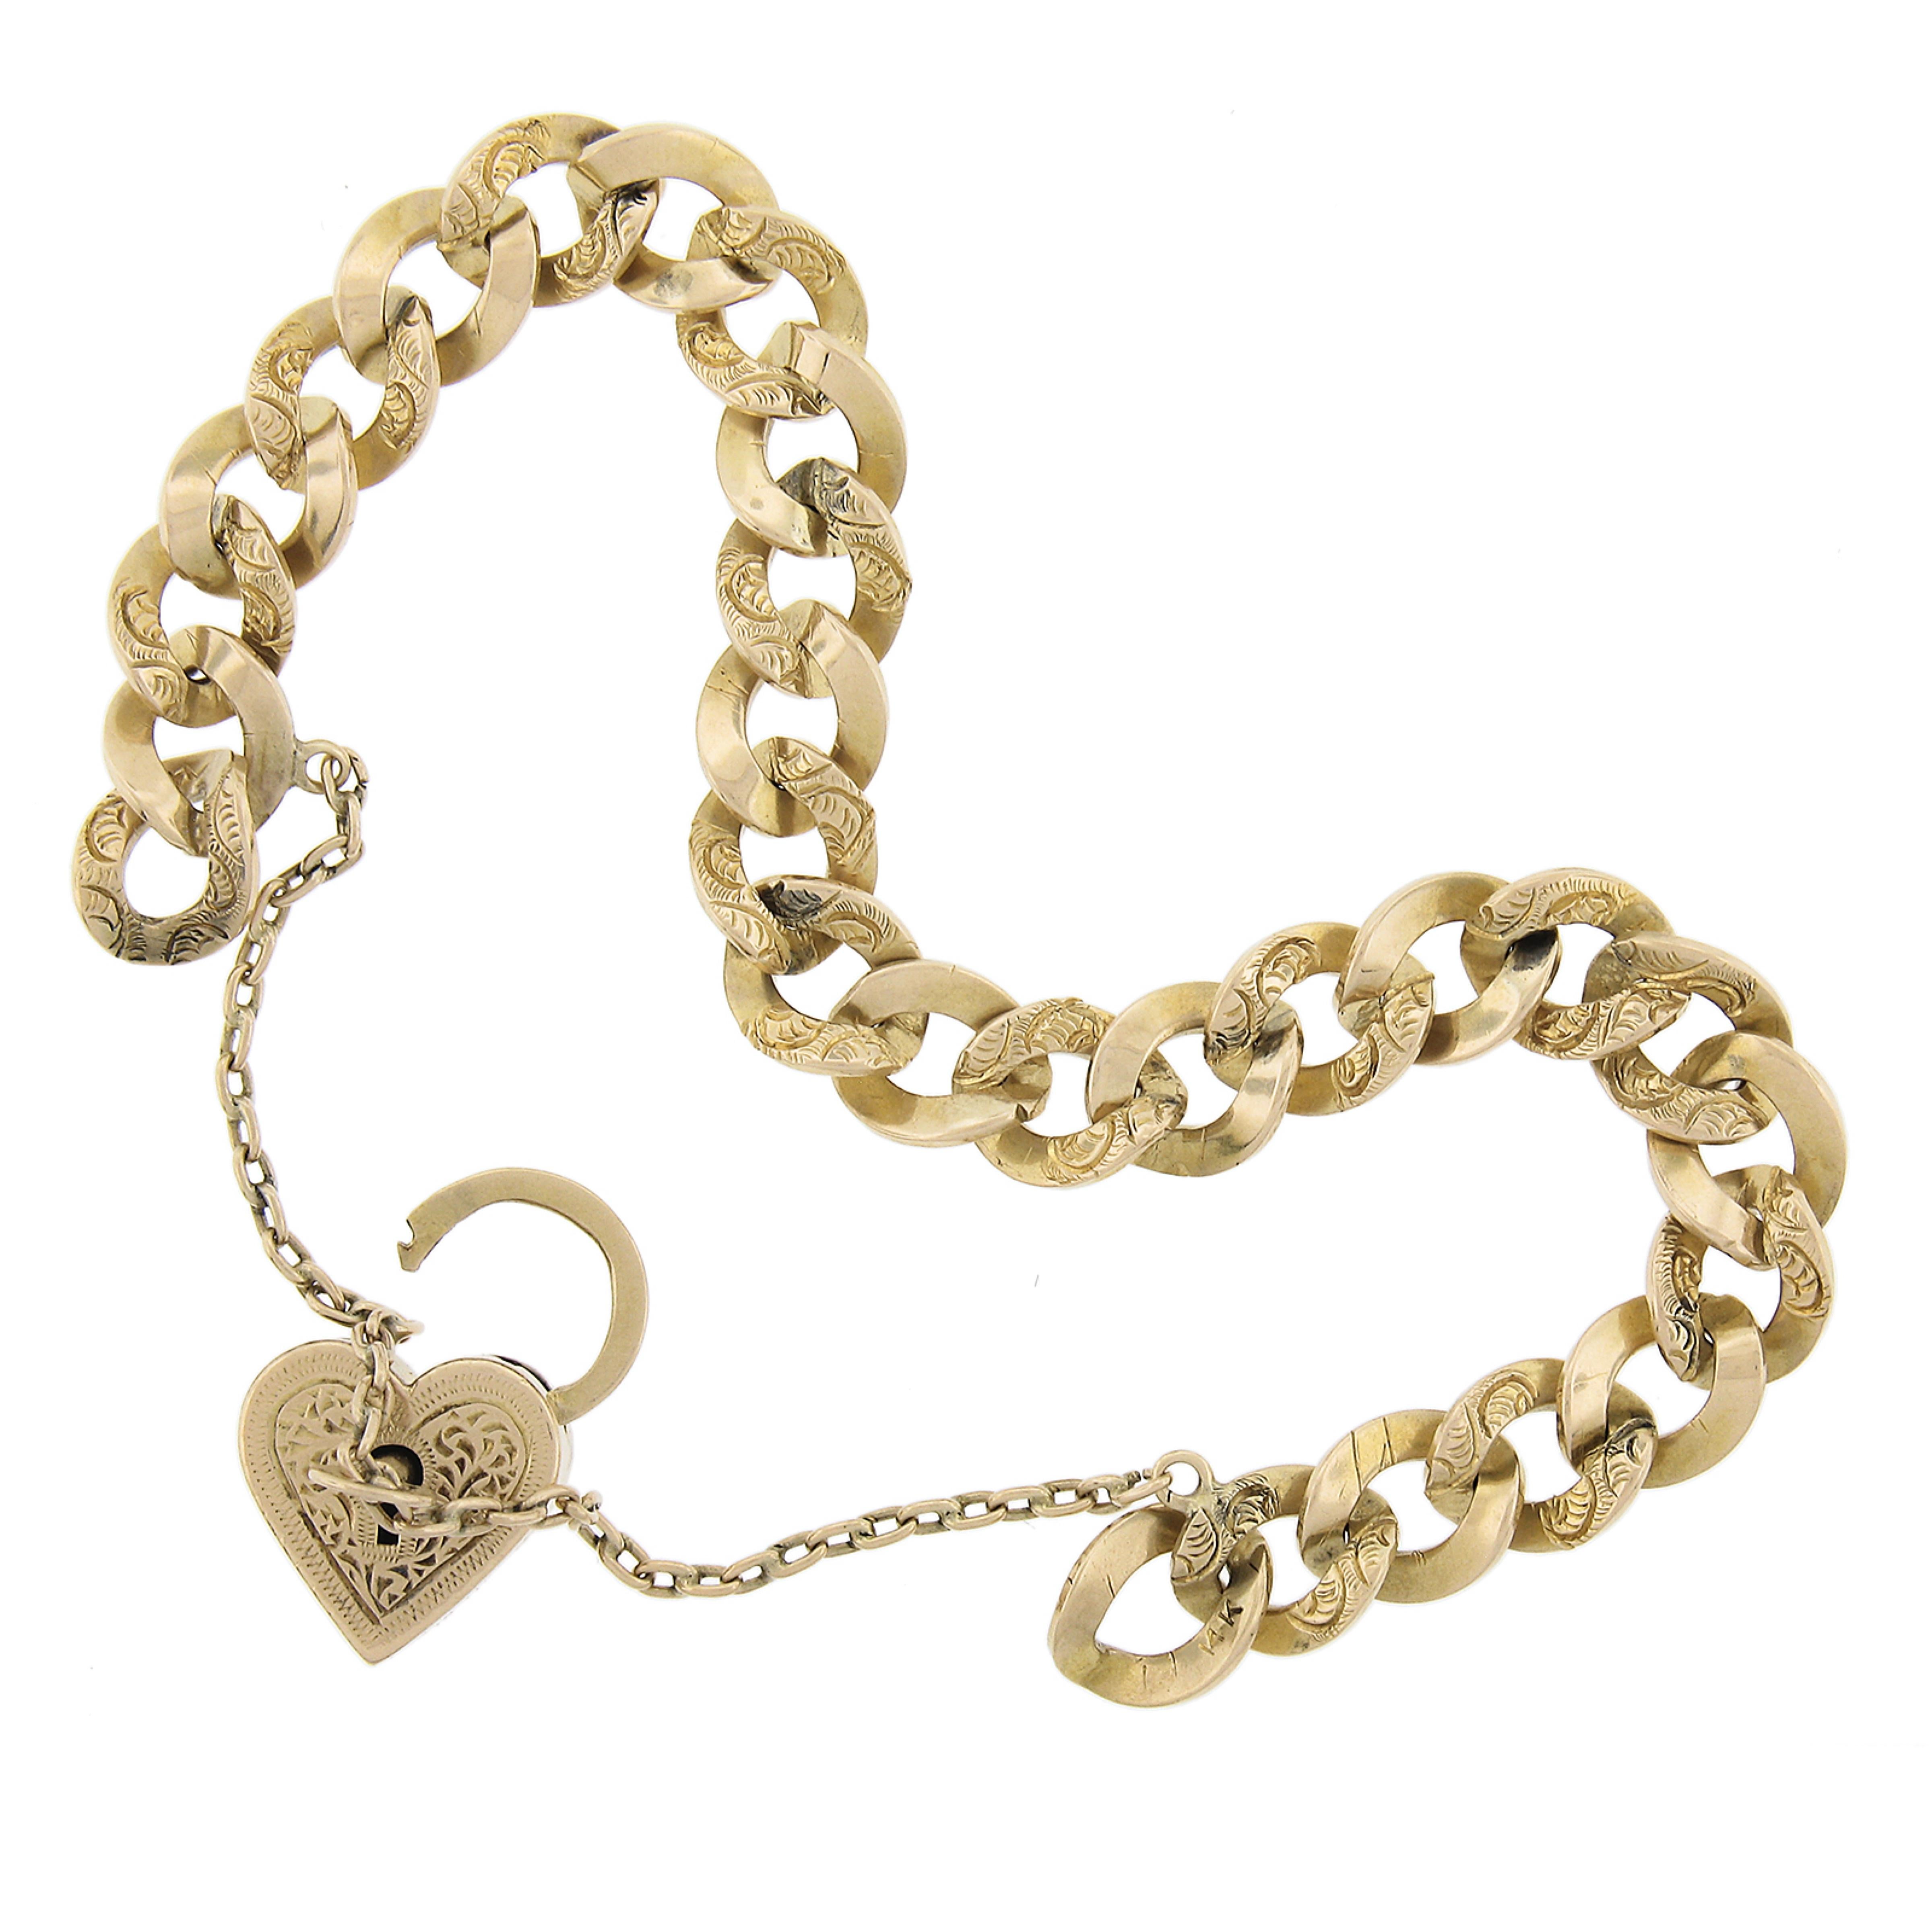 Material: 12K Solid Yellow Gold
Weight: 28.1 Grams
Chain Type: Hand Engraved Curb Link
Chain Length: Will comfortably fit up to a 7 Inch wrist
Clasp: Functional Turn-Lock Key Clasp w/ 3.75